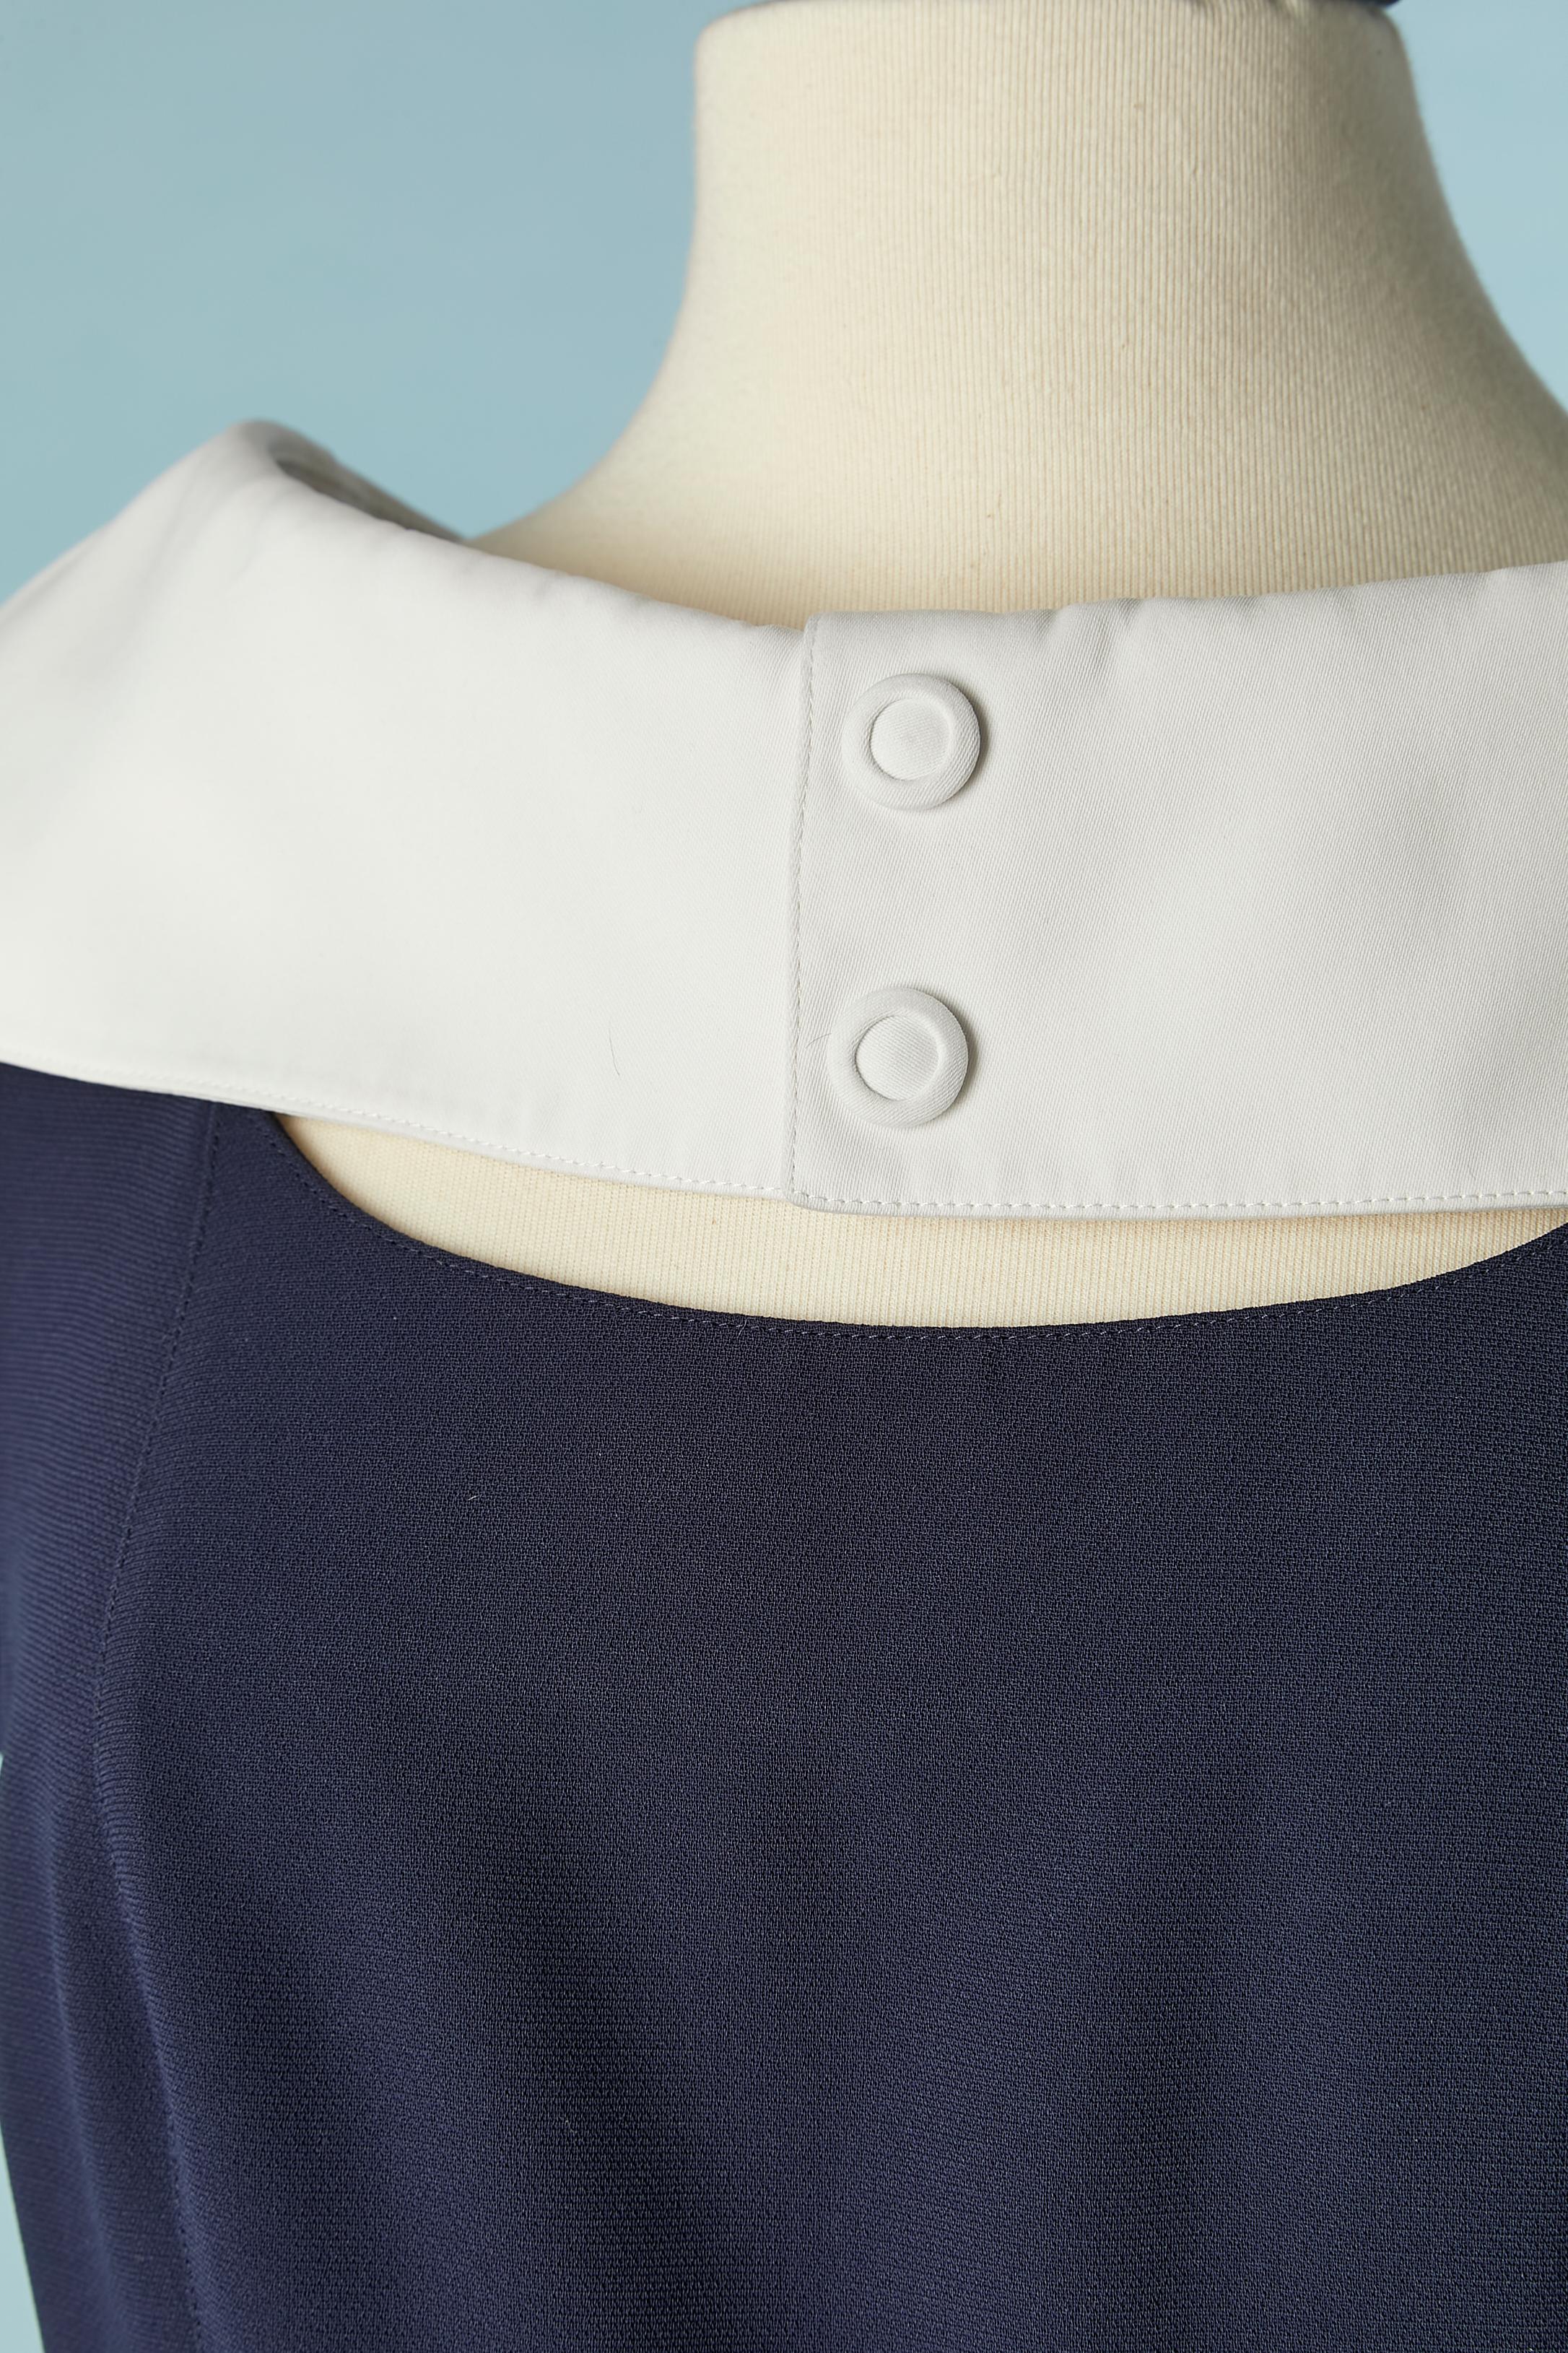 Navy blue dress with white collar and edge. No fabric composition but the navy blue fabric could be crêpe. The white collar and bottom edge is cotton. Lining is probably acetate. Snap covered with cotton on the detachable ( with snaps) collar. Zip